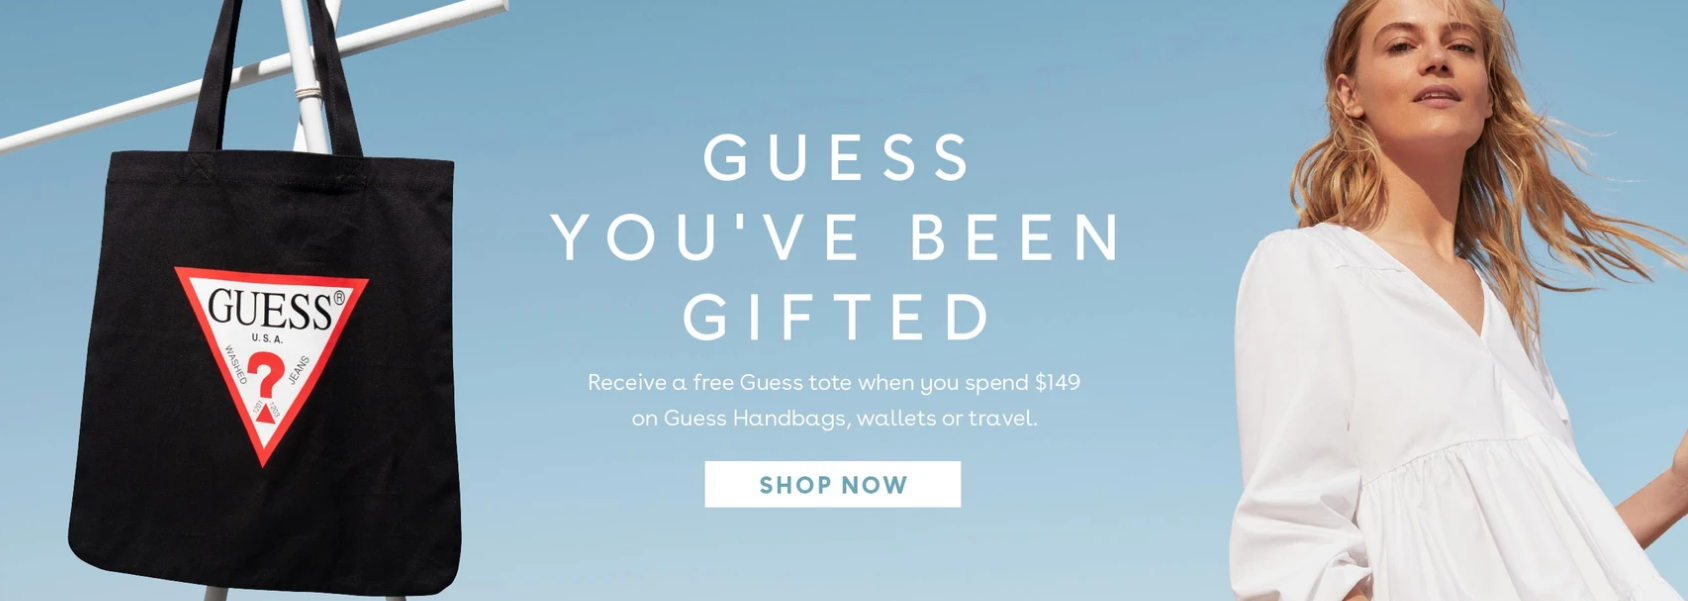 Get a free Guess Tote bag when you spend $149 on any Guess handbag, wallet or travel bag